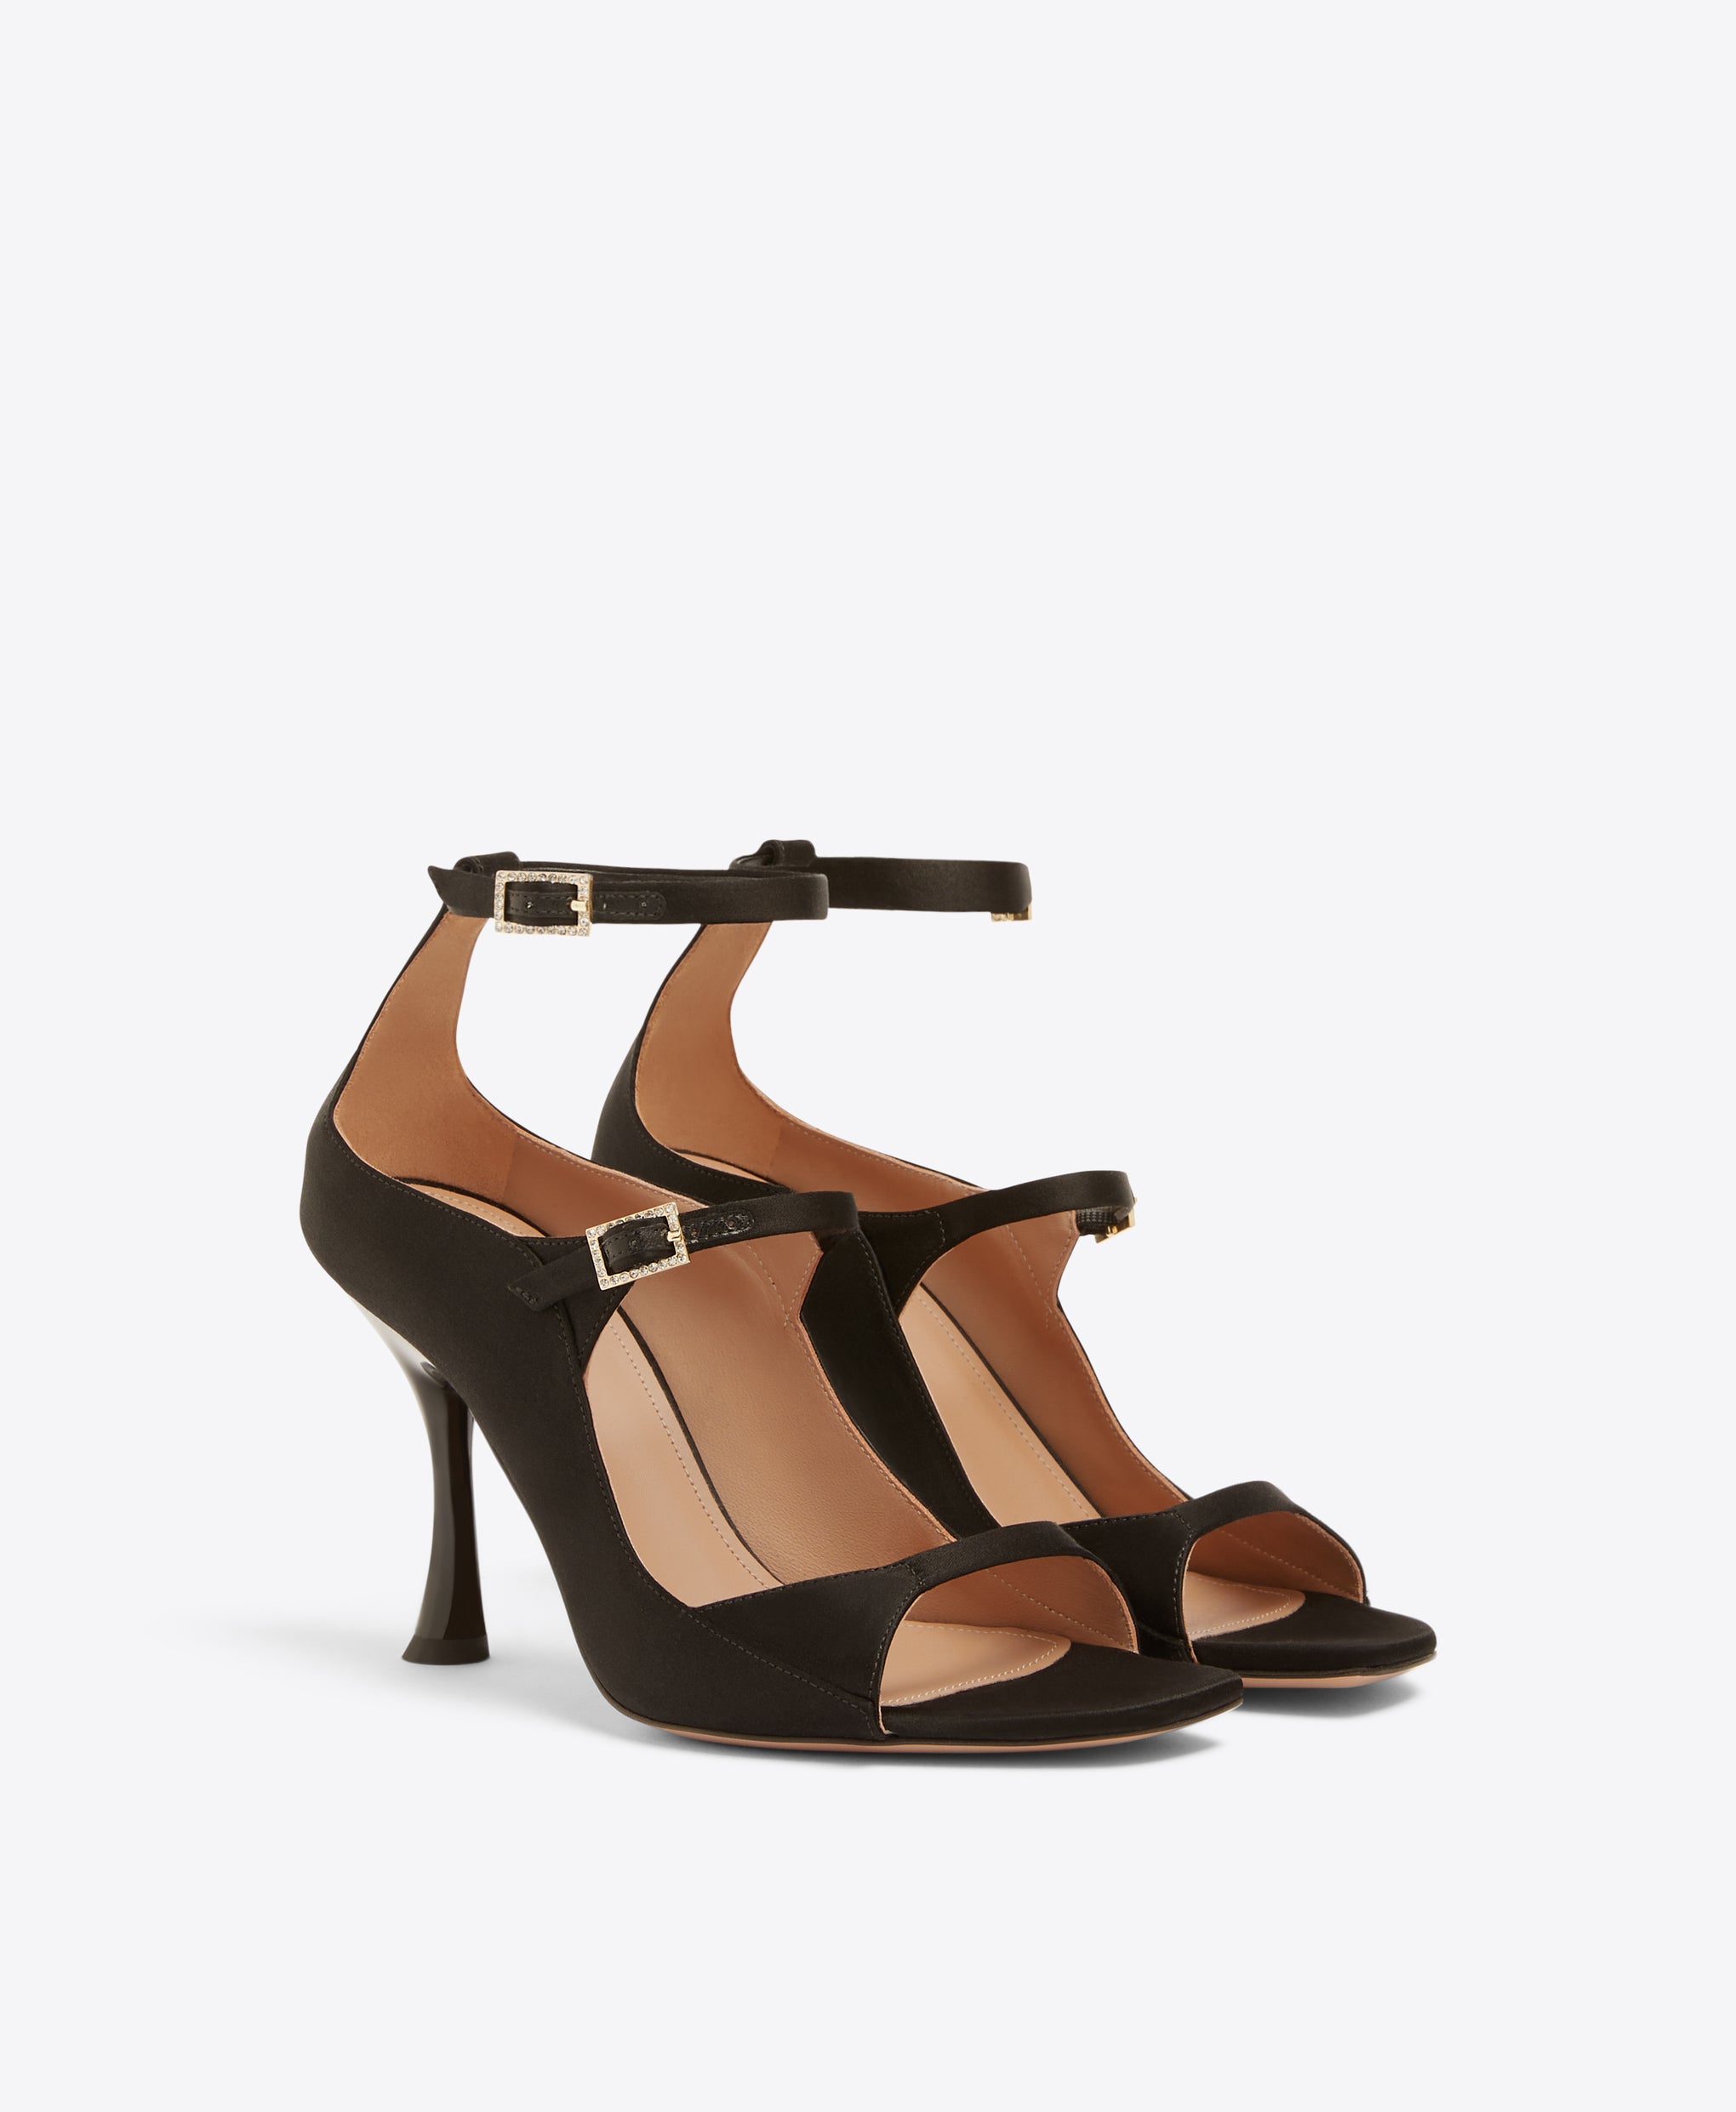 Riley 90 Black Satin Heeled Sandals Malone Souliers